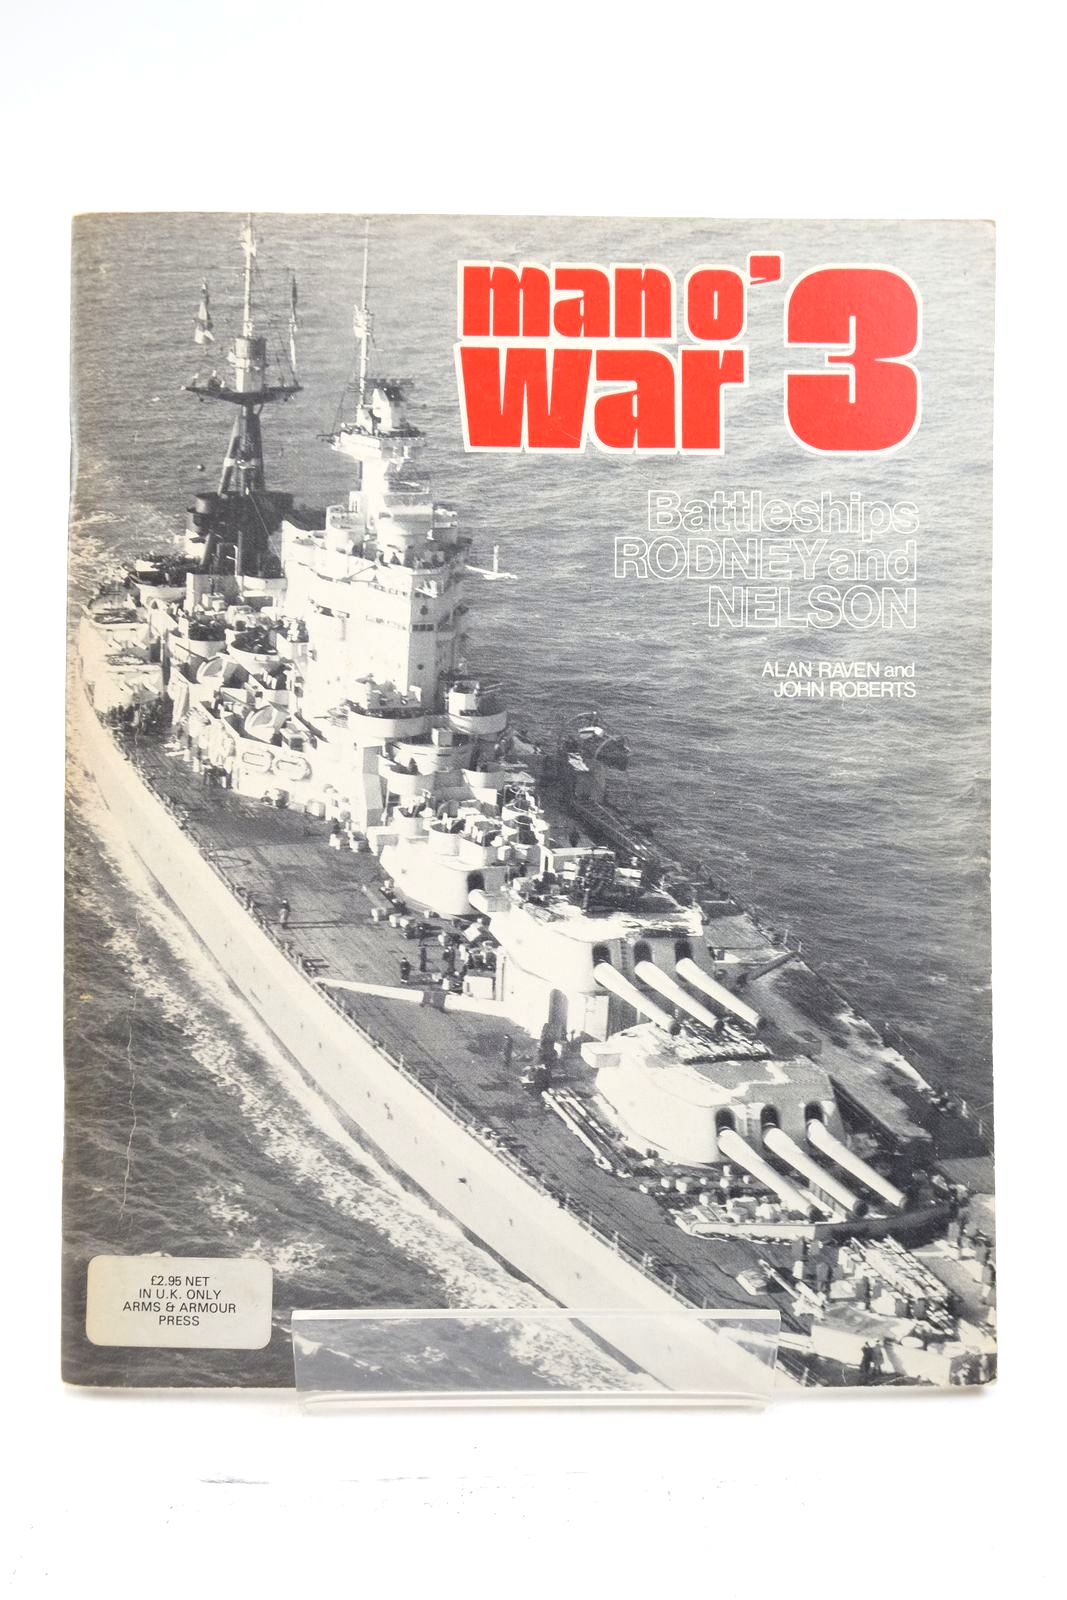 Photo of MAN O' WAR 3: BATTLESHIPS RODNEY AND NELSON written by Raven, Alan
Roberts, John published by Arms & Armour Press, R.S.V. Publishing Inc. (STOCK CODE: 2138977)  for sale by Stella & Rose's Books